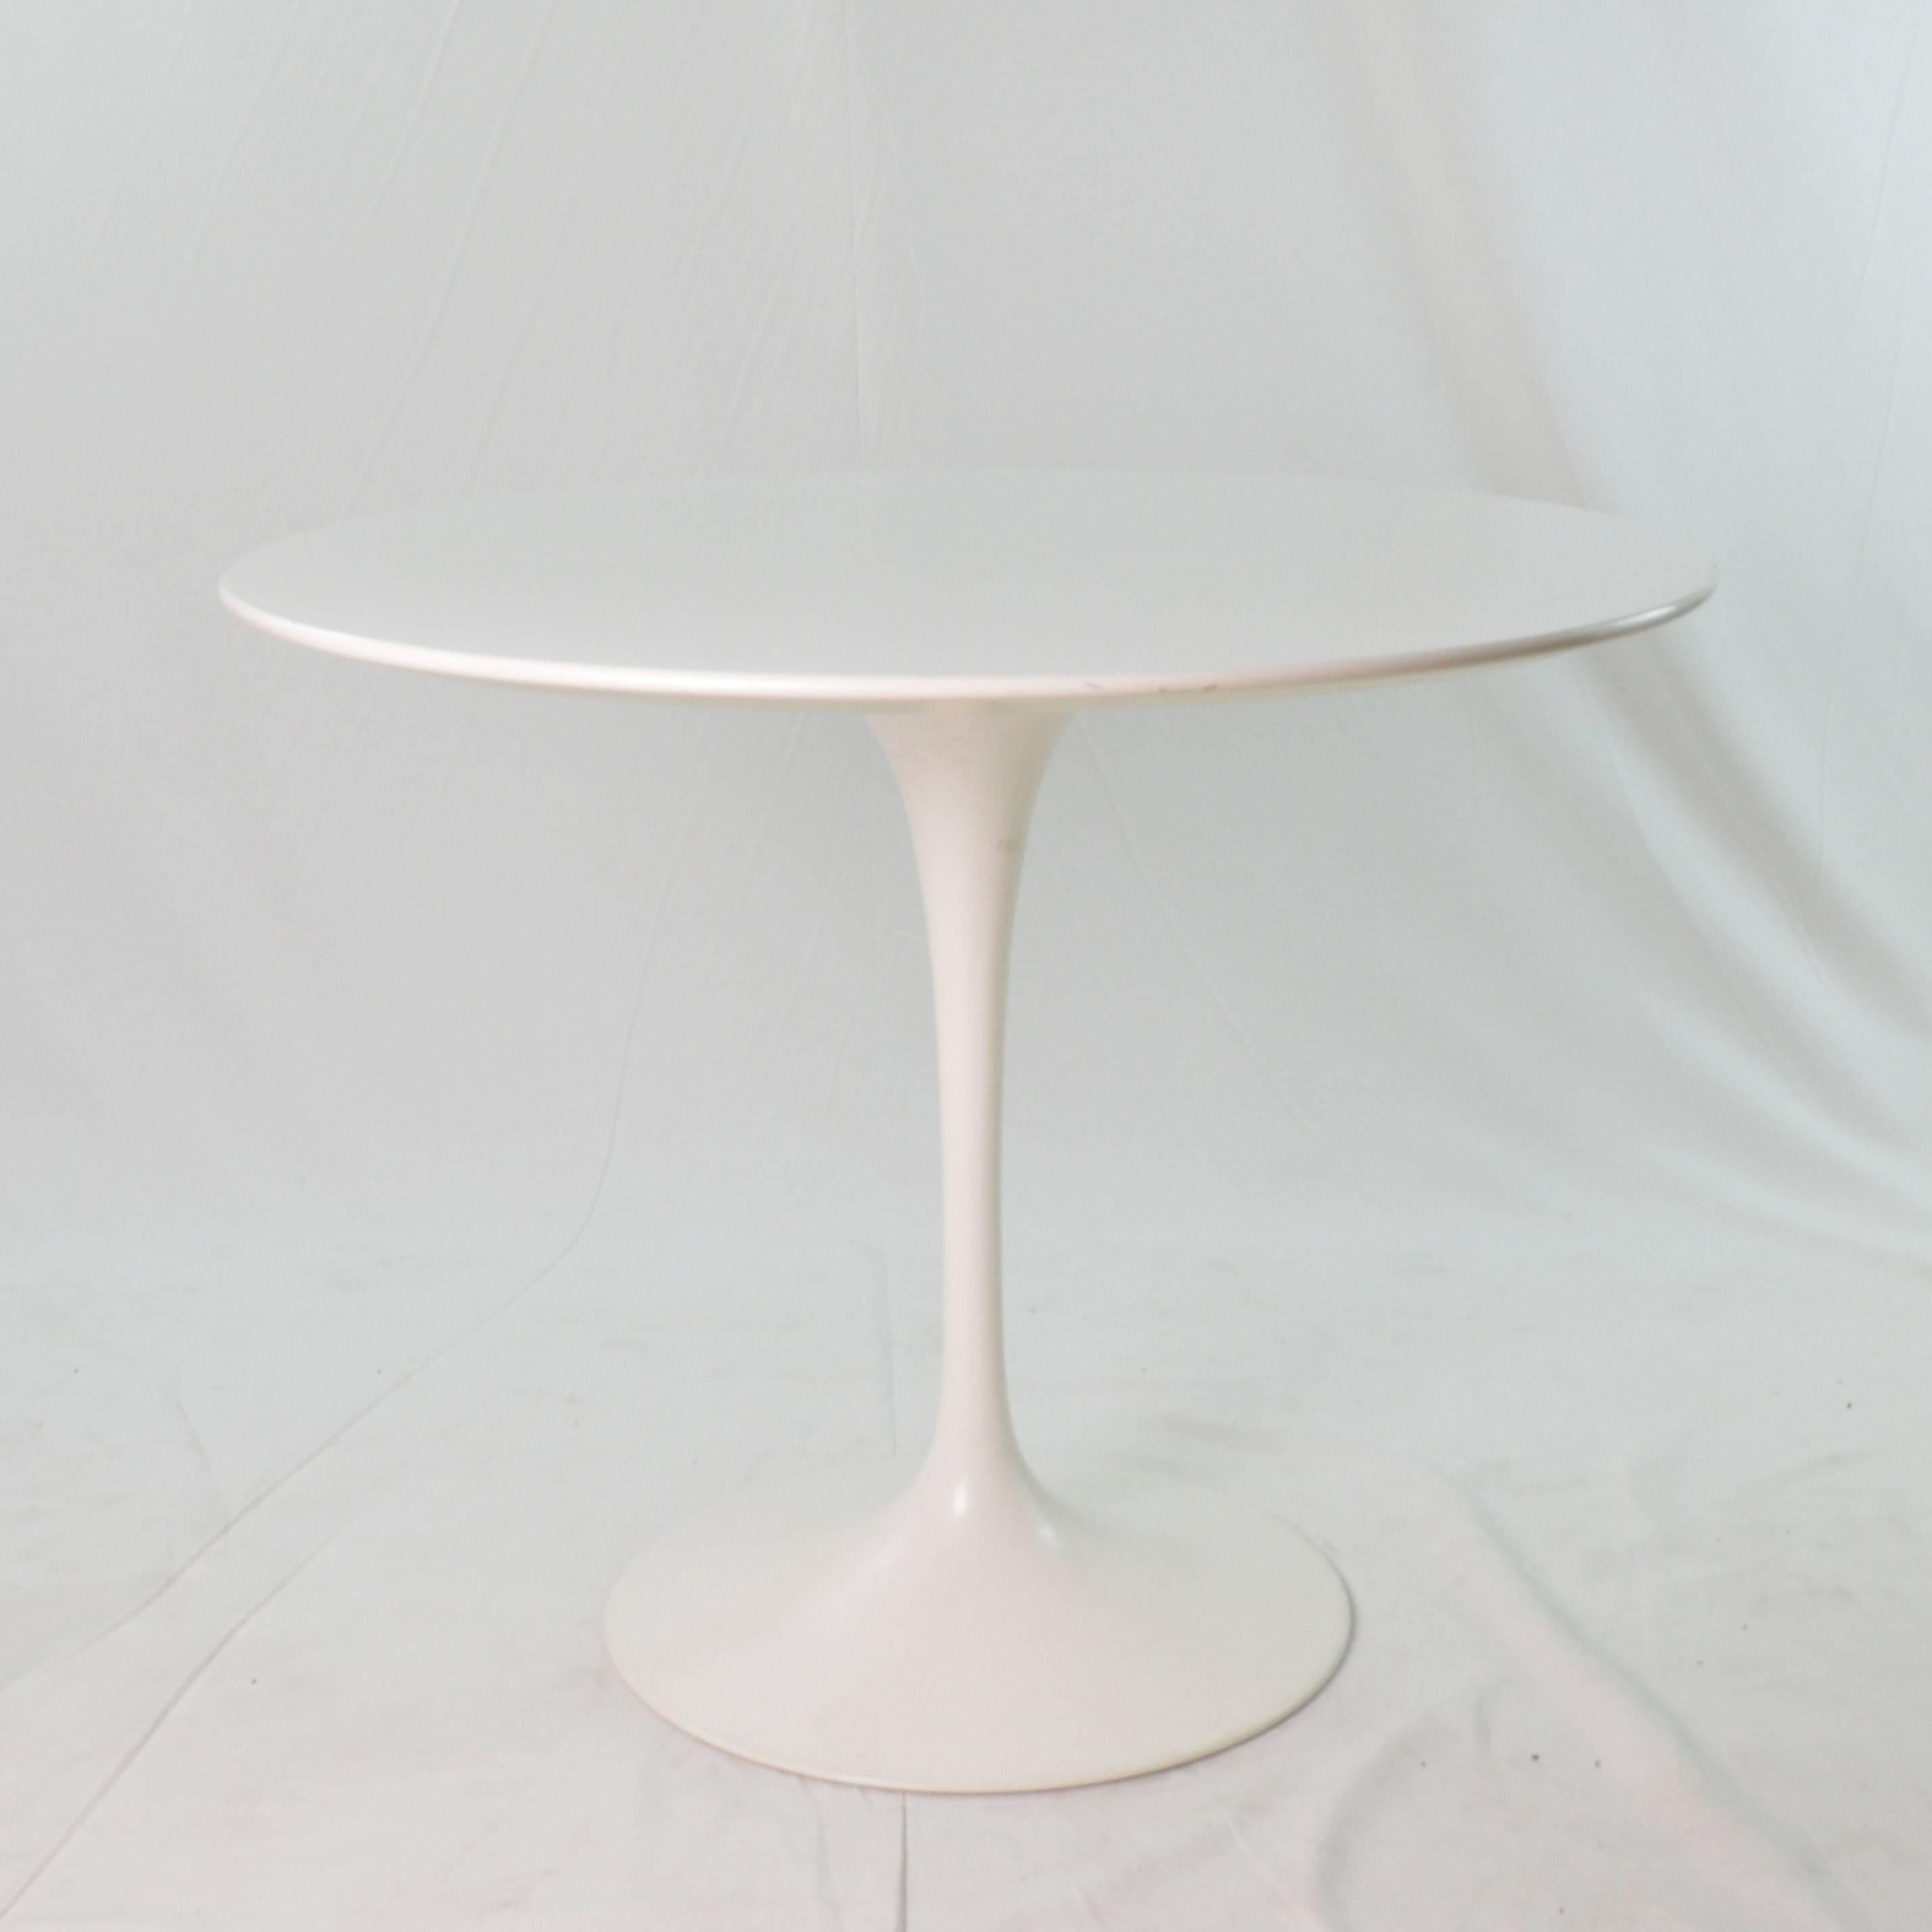 Iconic design table with central unique leg part of the Pedestal collection. With the Pedestal collection, Eero Saarinen resolved the 